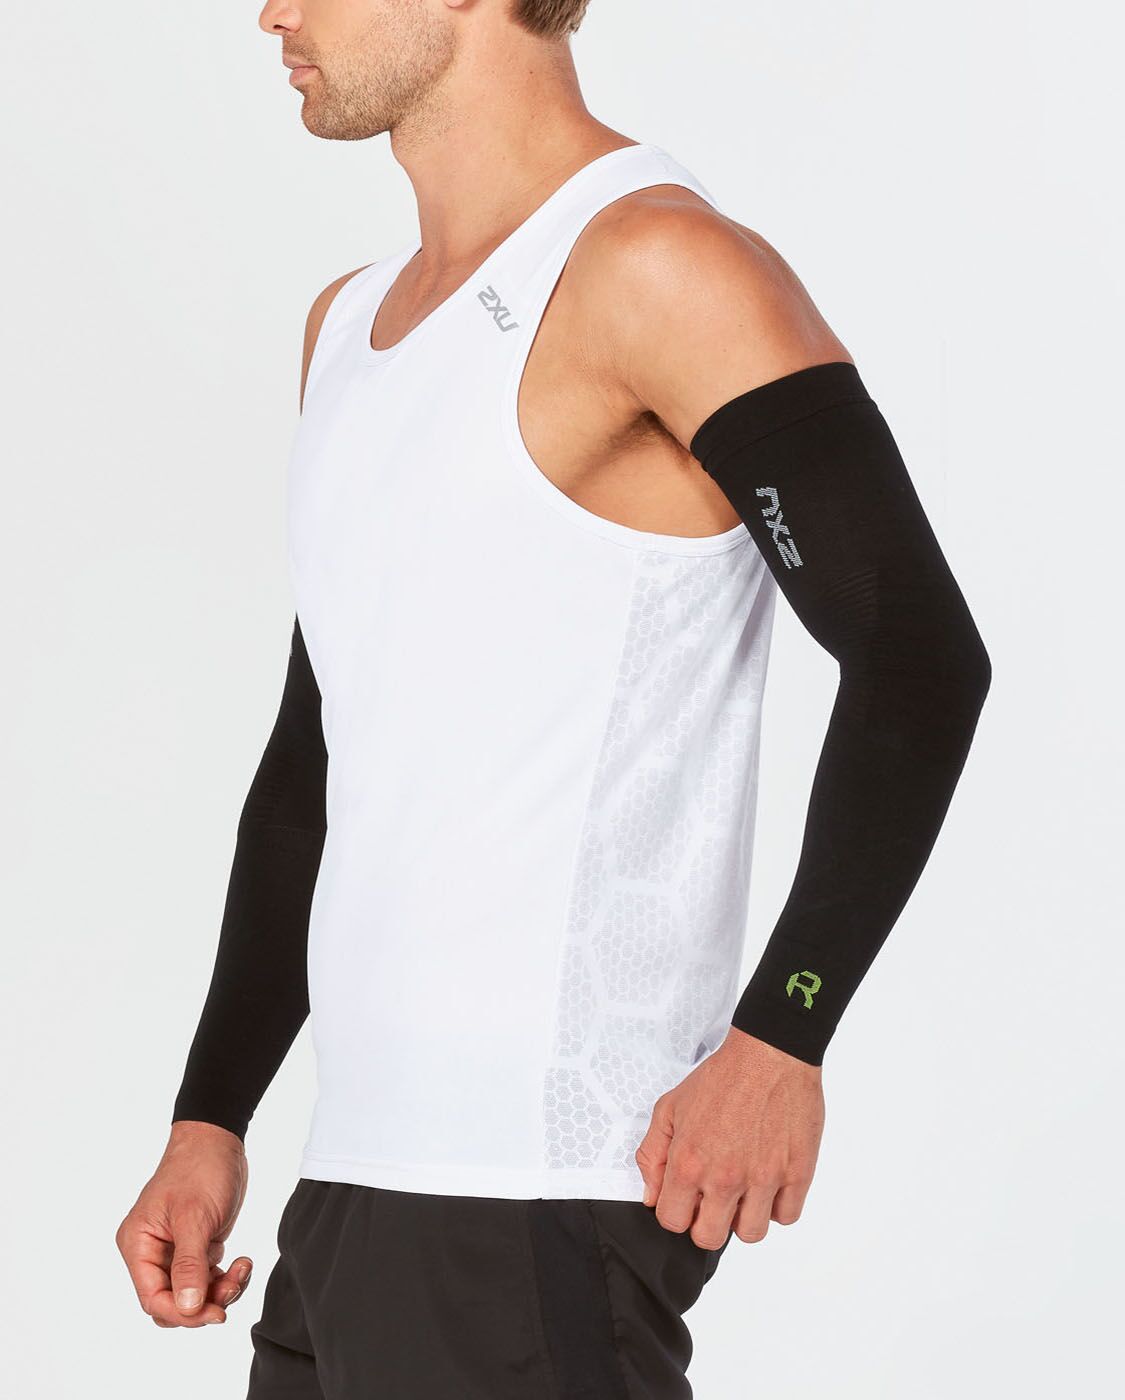 2XU South Africa - Recovery Flex Arm Sleeves - Black/Nero